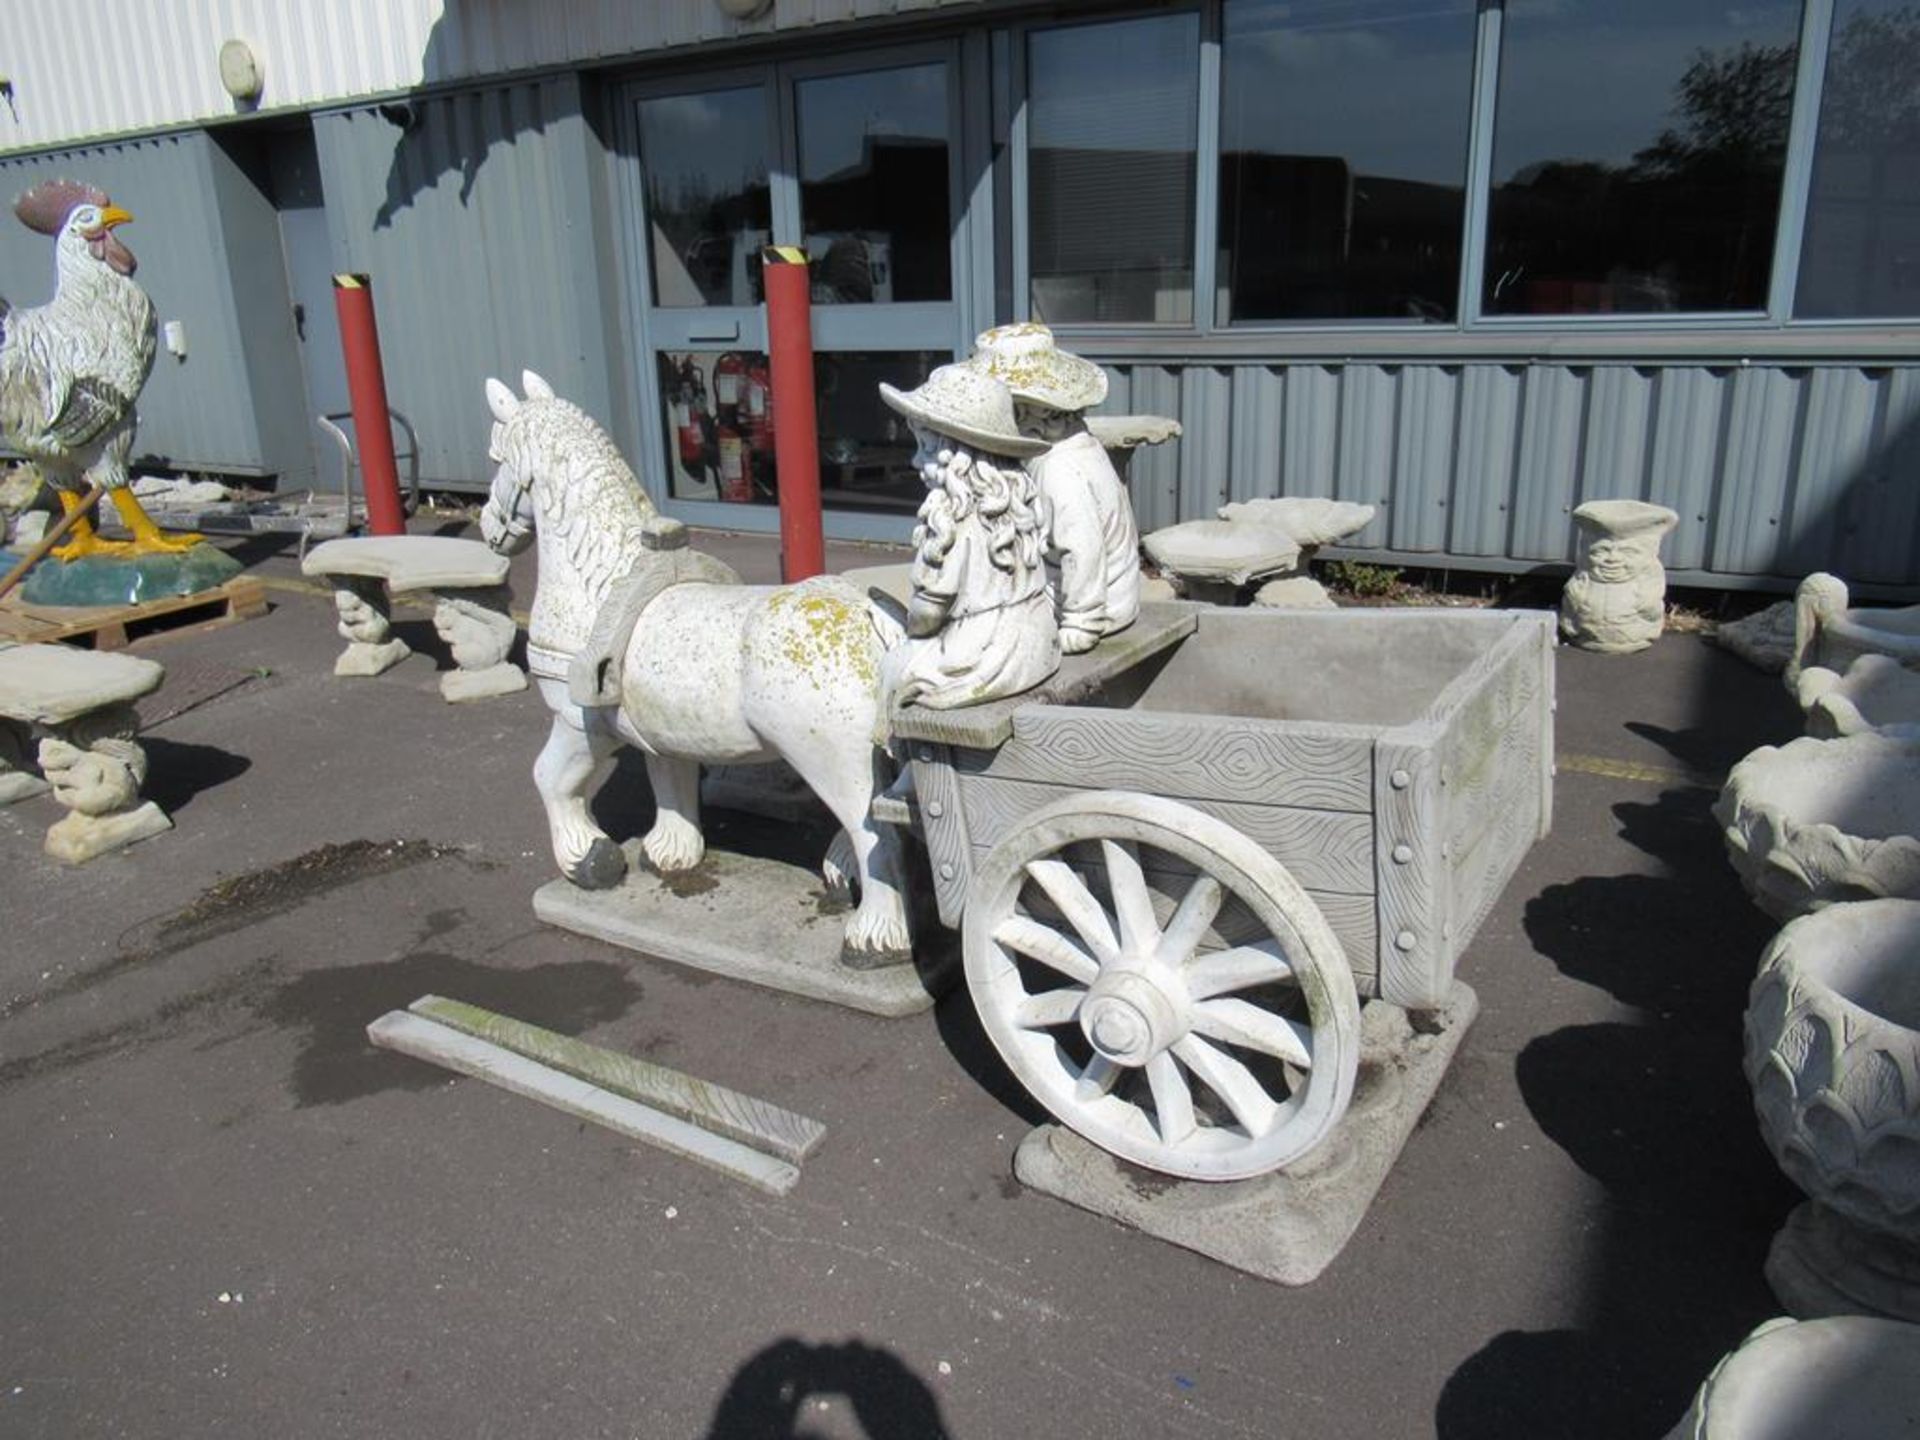 Border stone horse and cart garden ornament - Image 4 of 10